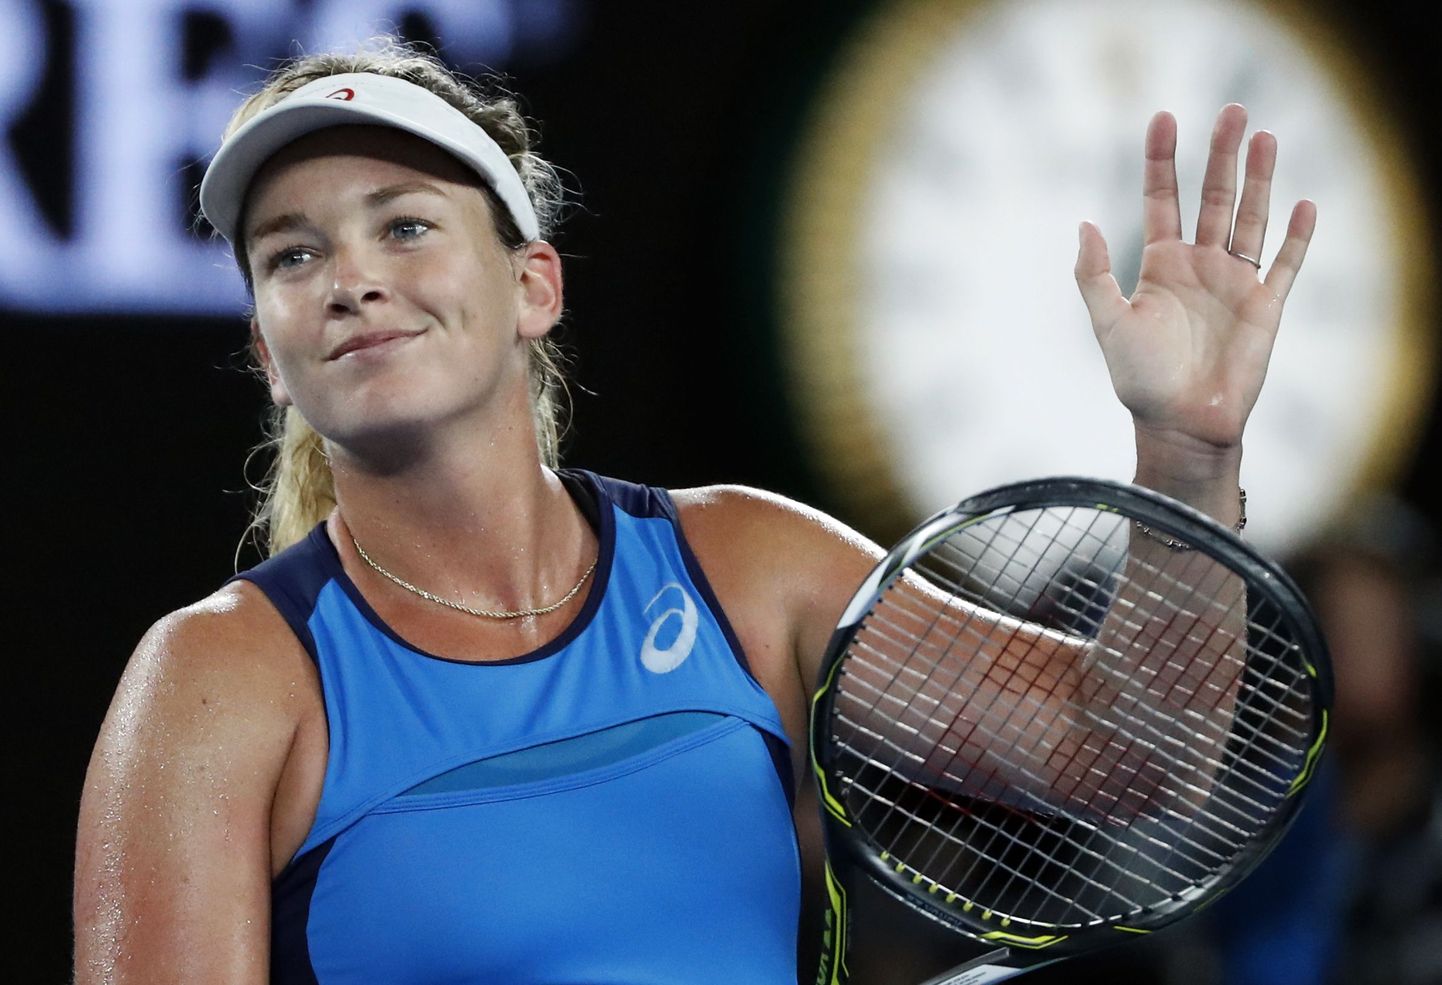 United States' Coco Vandeweghe celebrates after defeating Germany's Angelique Kerber during their fourth round match at the Australian Open tennis championships in Melbourne, Australia, Monday, Jan. 23, 2017. (AP Photo/Dita Alangkara)